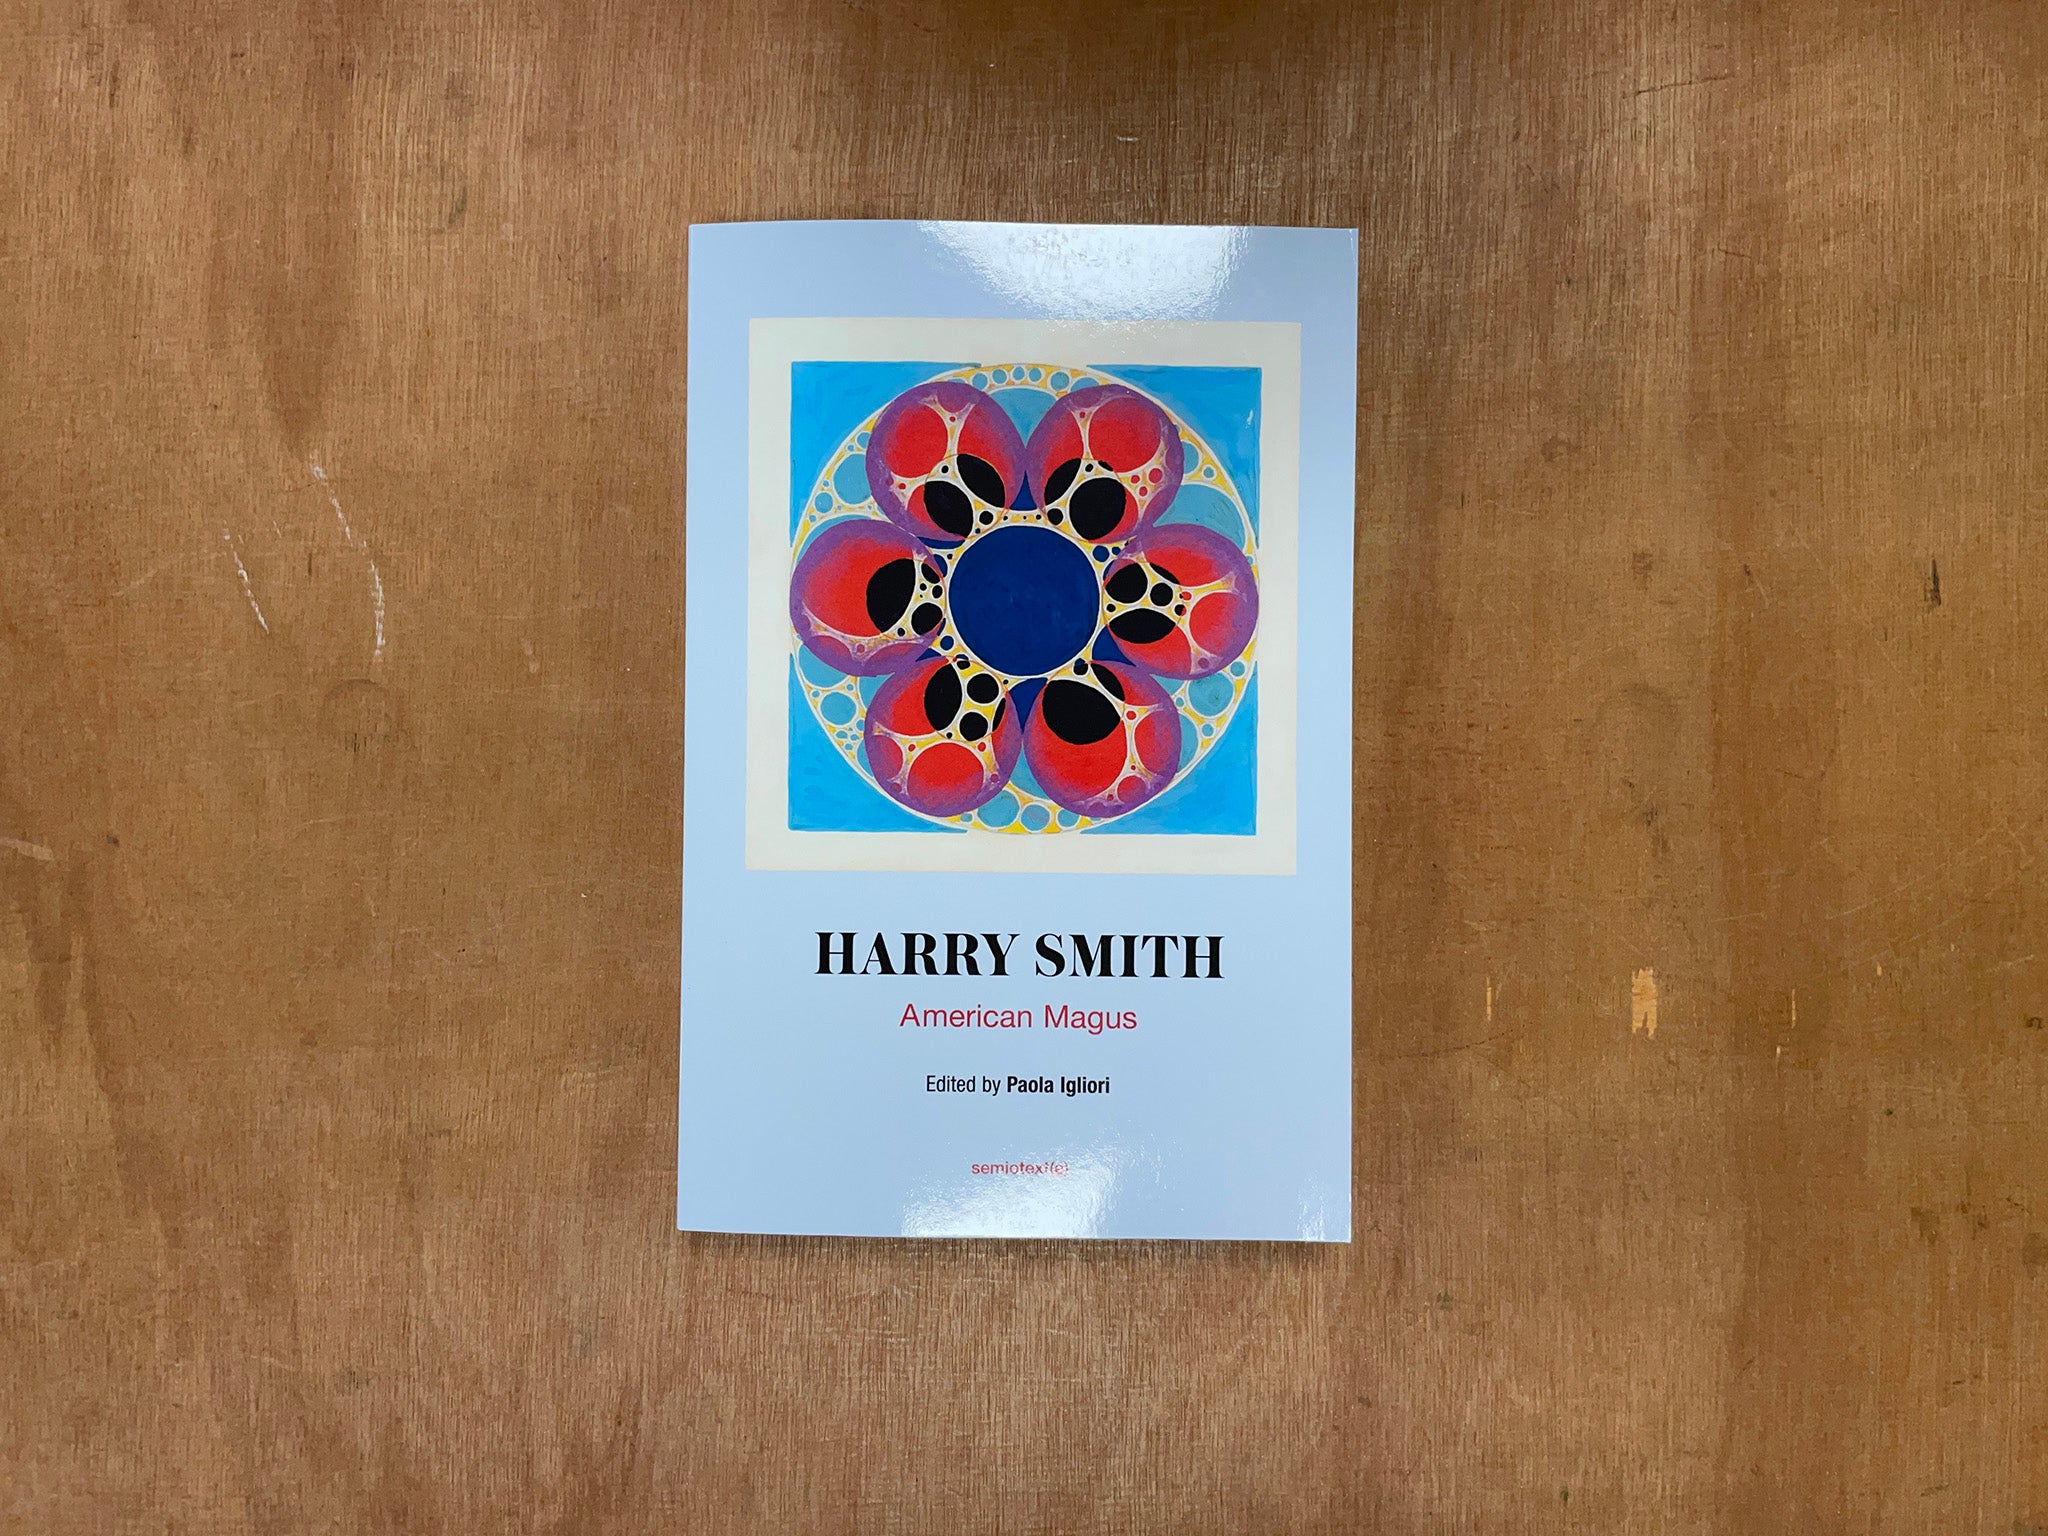 HARRY SMITH: AMERICAN MAGUS Edited by Paola Igliori